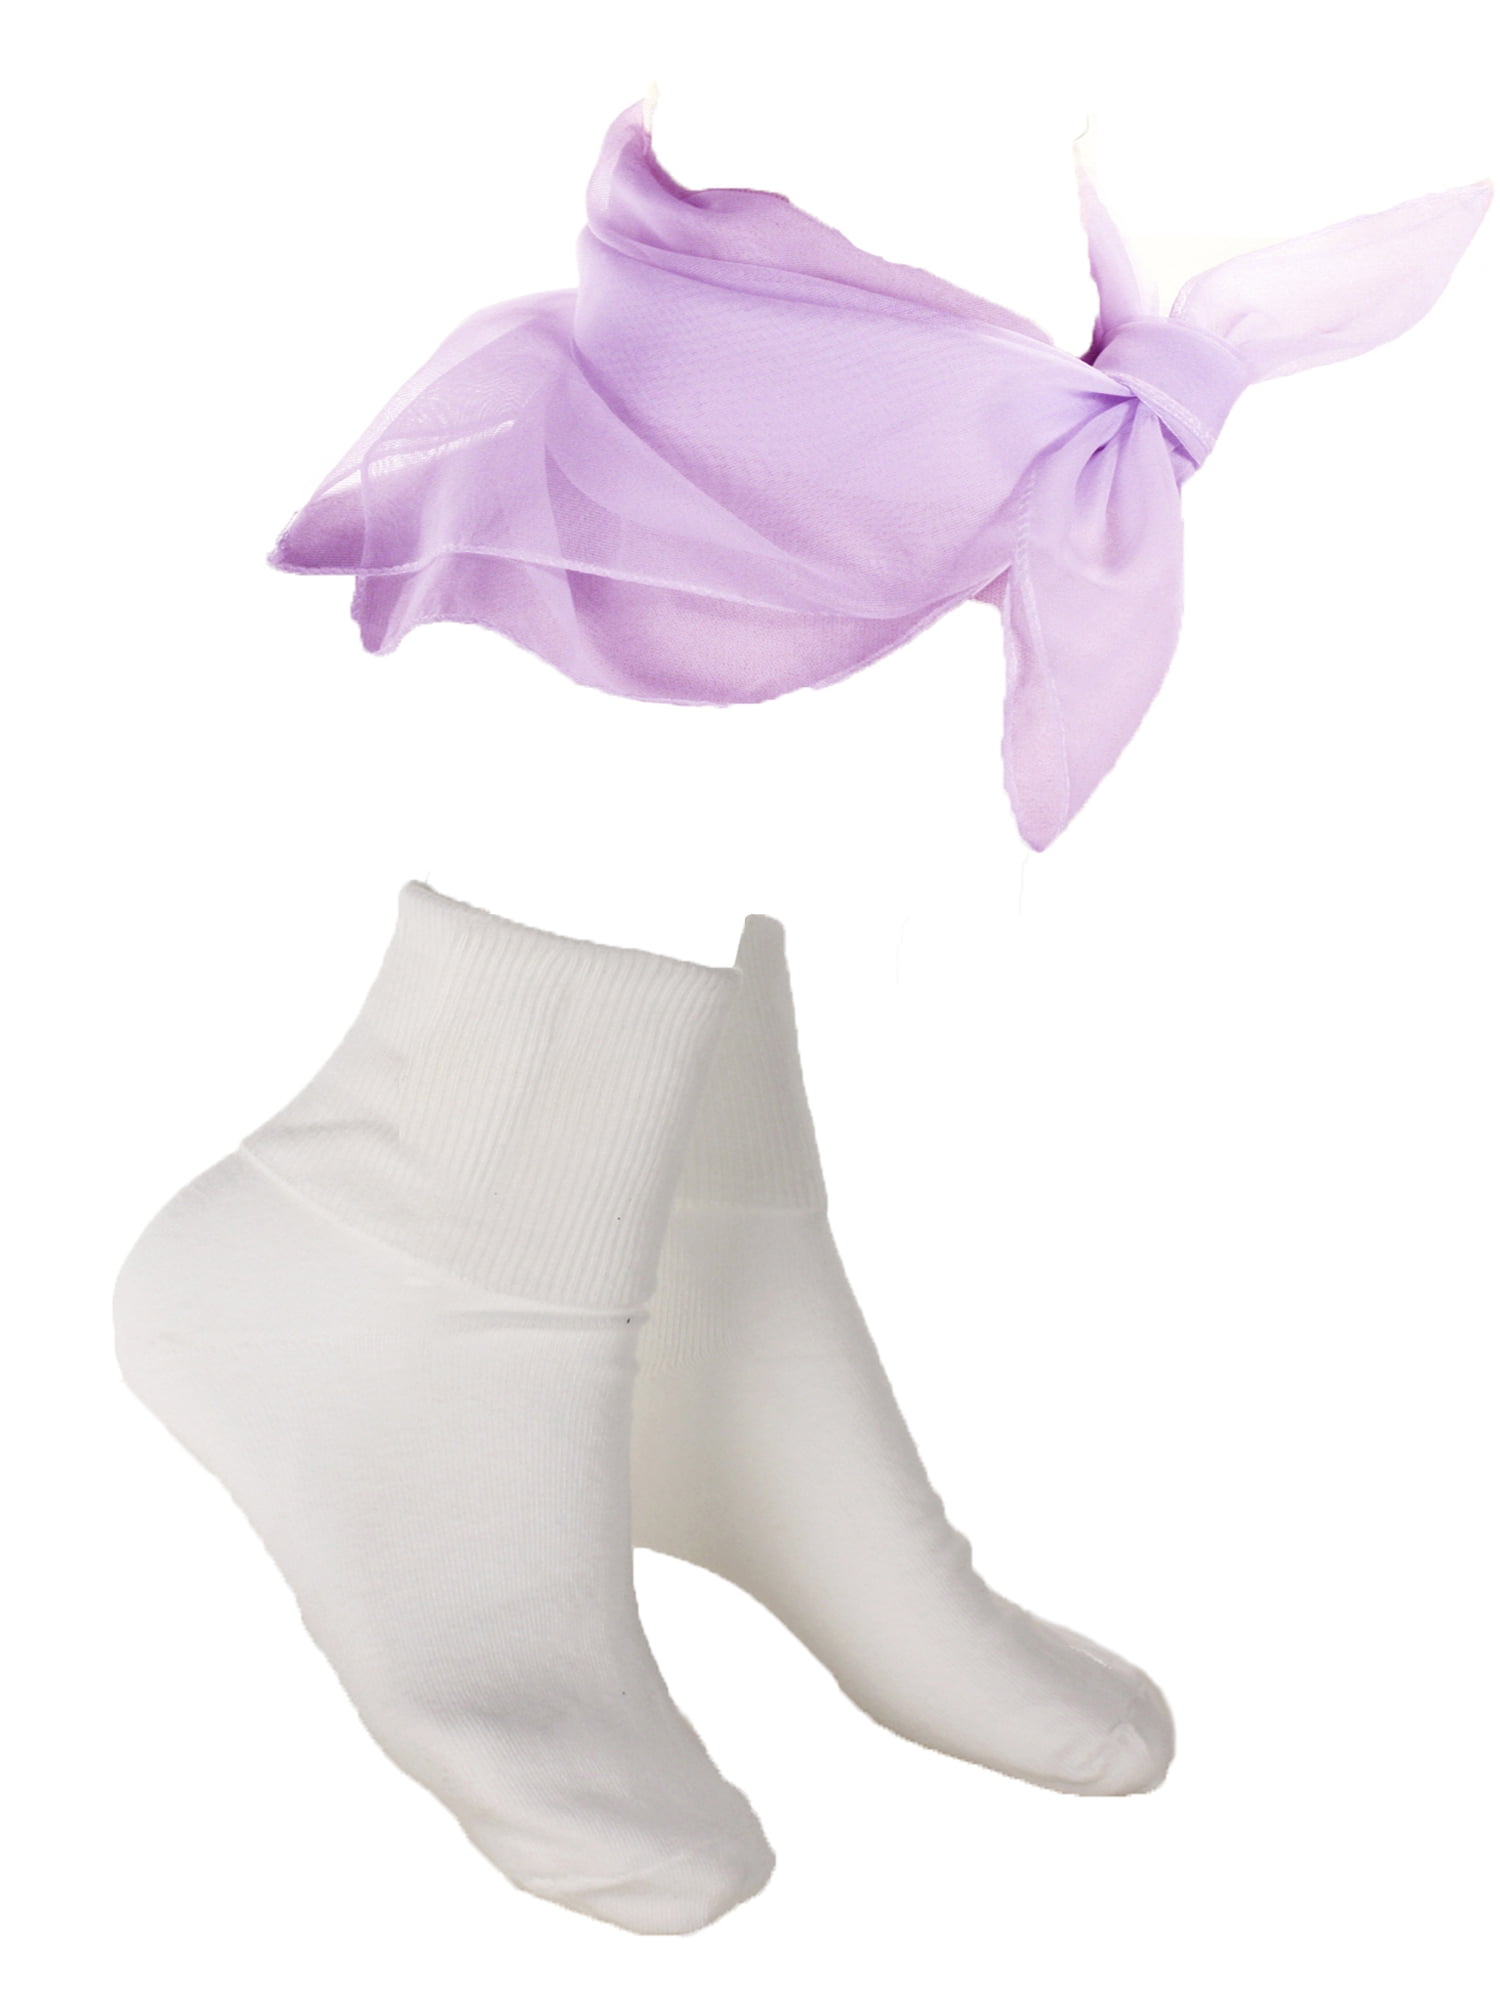 White Bobby Socks & Lilac Sheer Chiffon Scarf - 50s Style Accessories ...